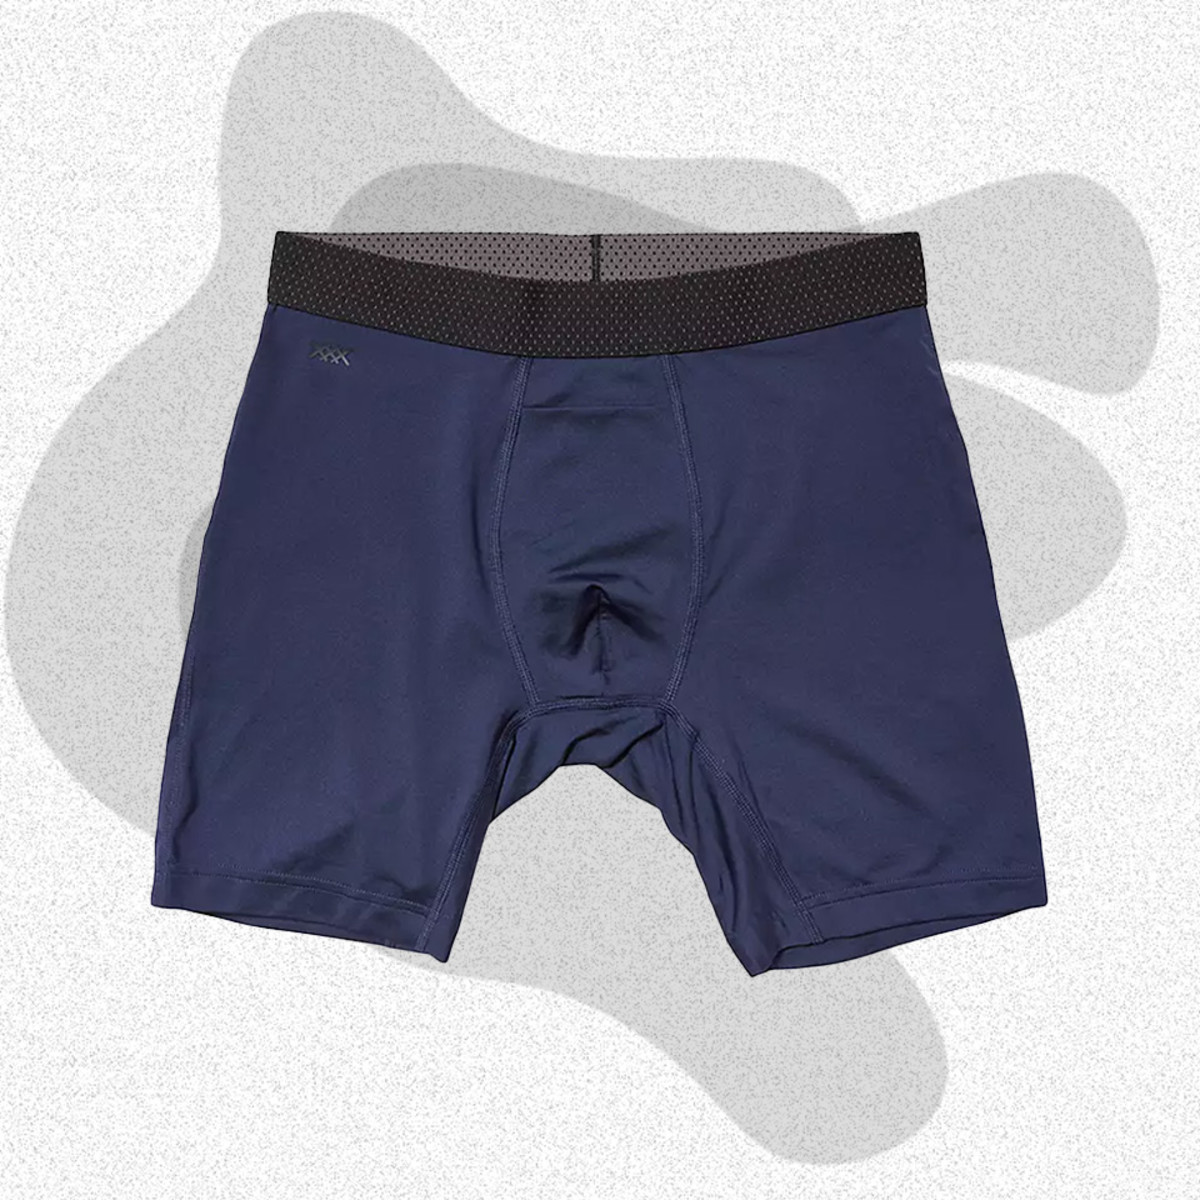 Mack Weldon's new Stealth Boxer Brief is designed to feel like a second skin  - Acquire